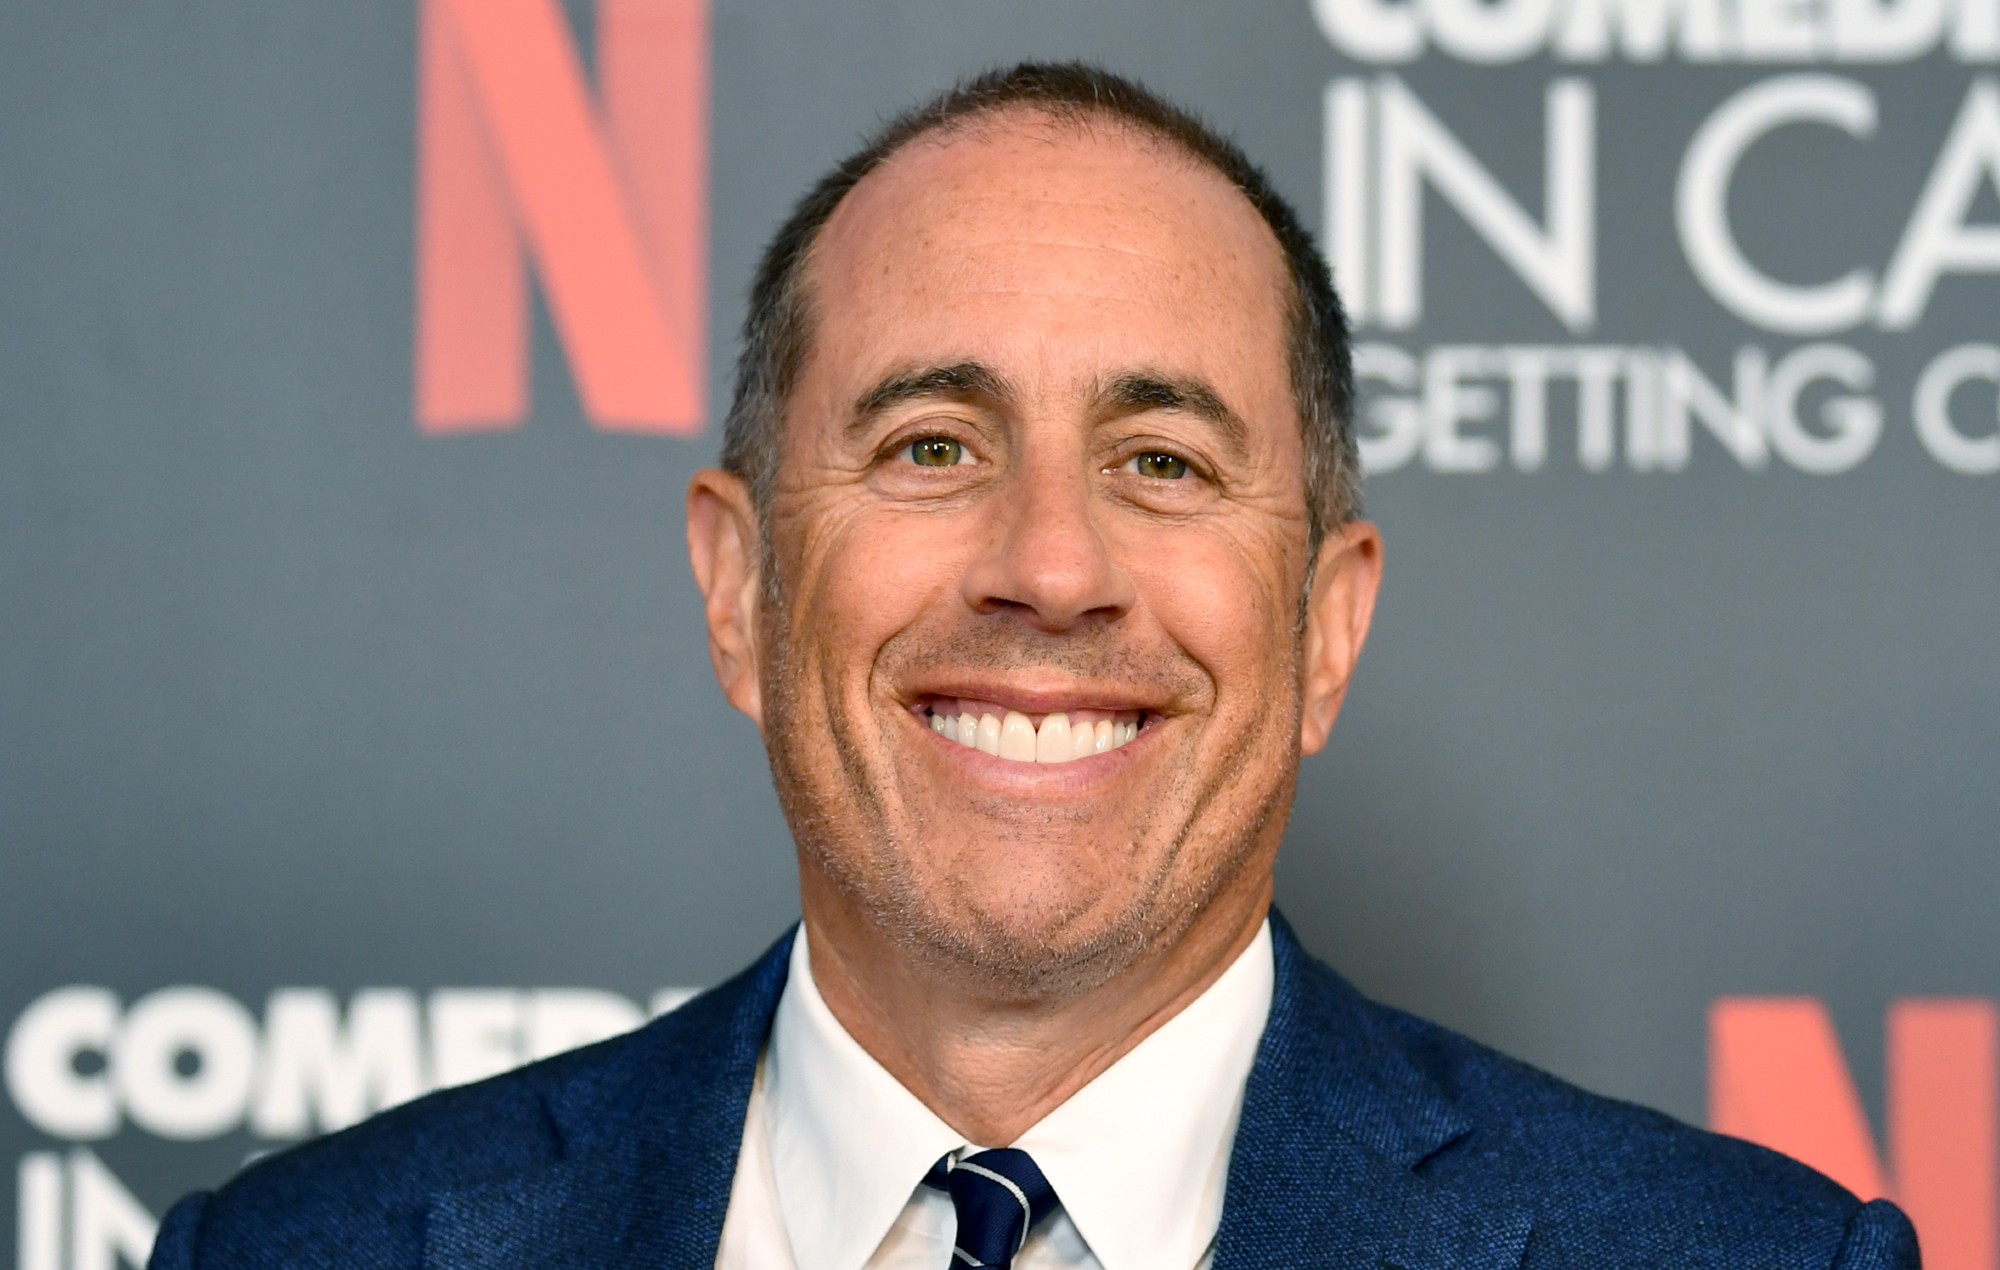 Jerry Seinfeld blames “extreme left and P.C. crap” for the current state of TV sitcoms